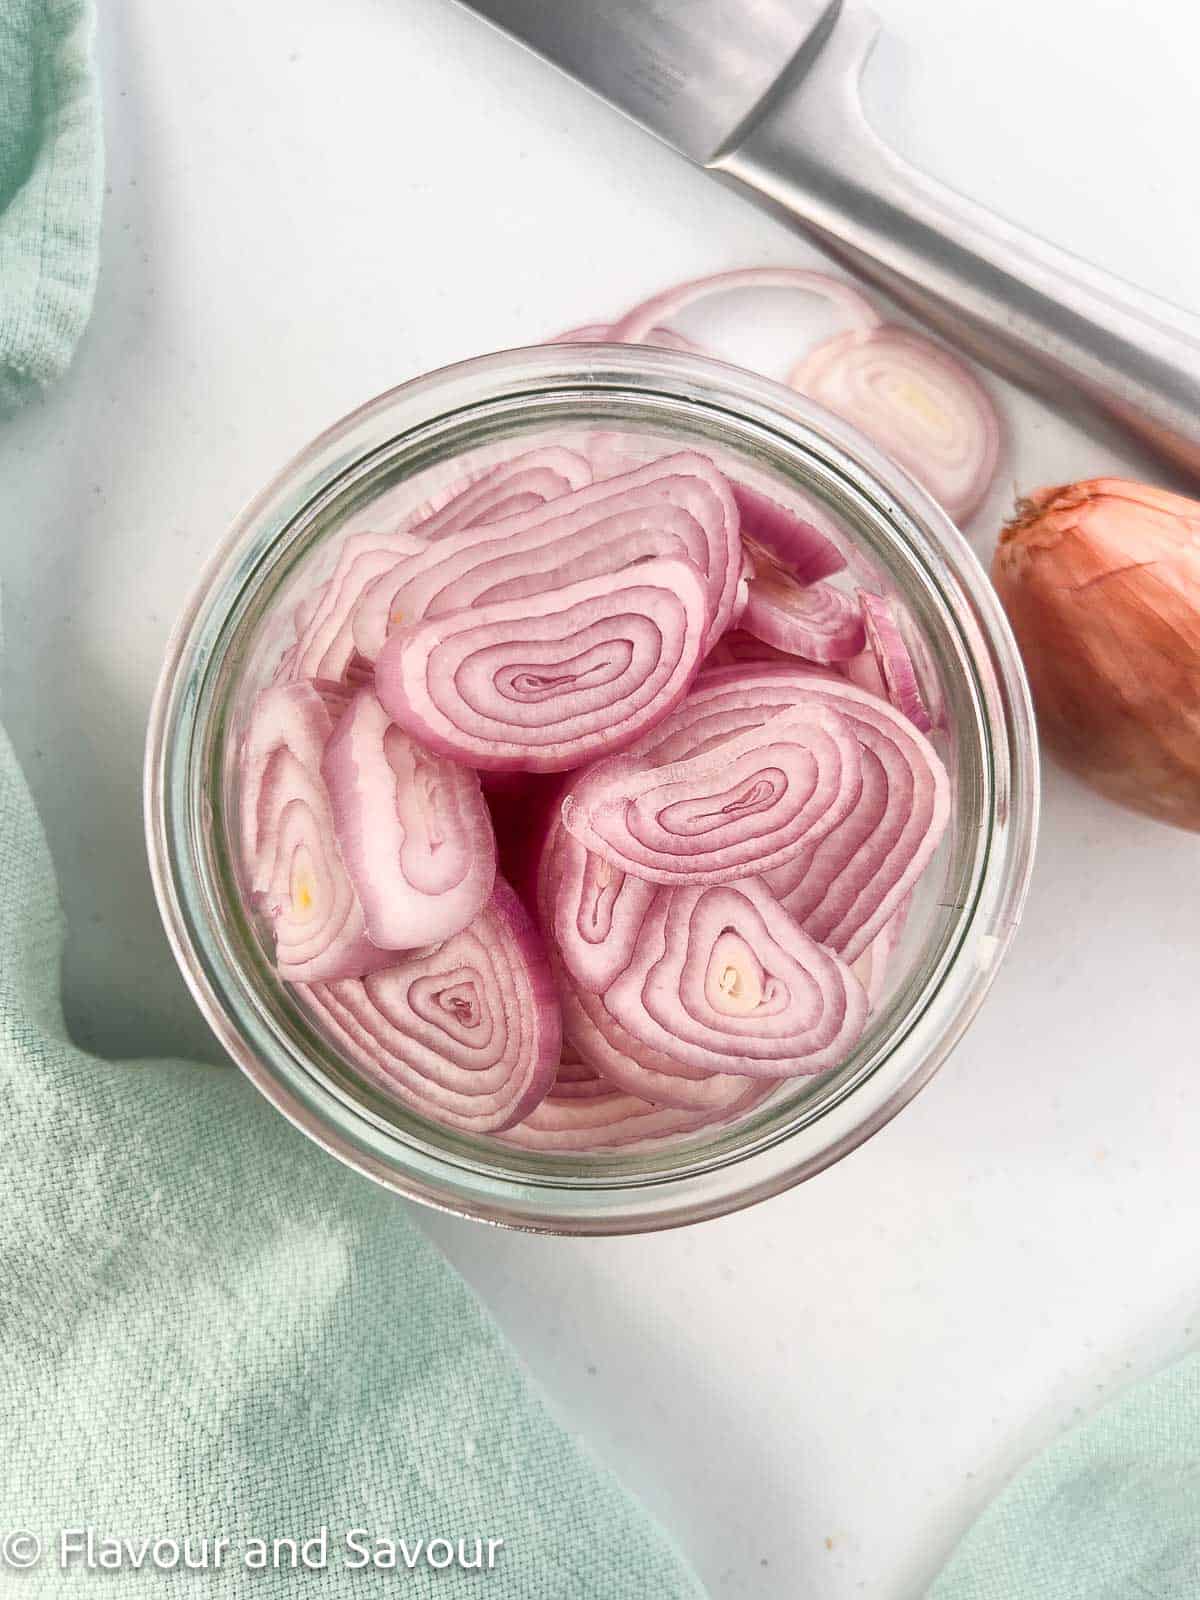 Sliced shallots in a jar with a knife and a shallot beside the jar.